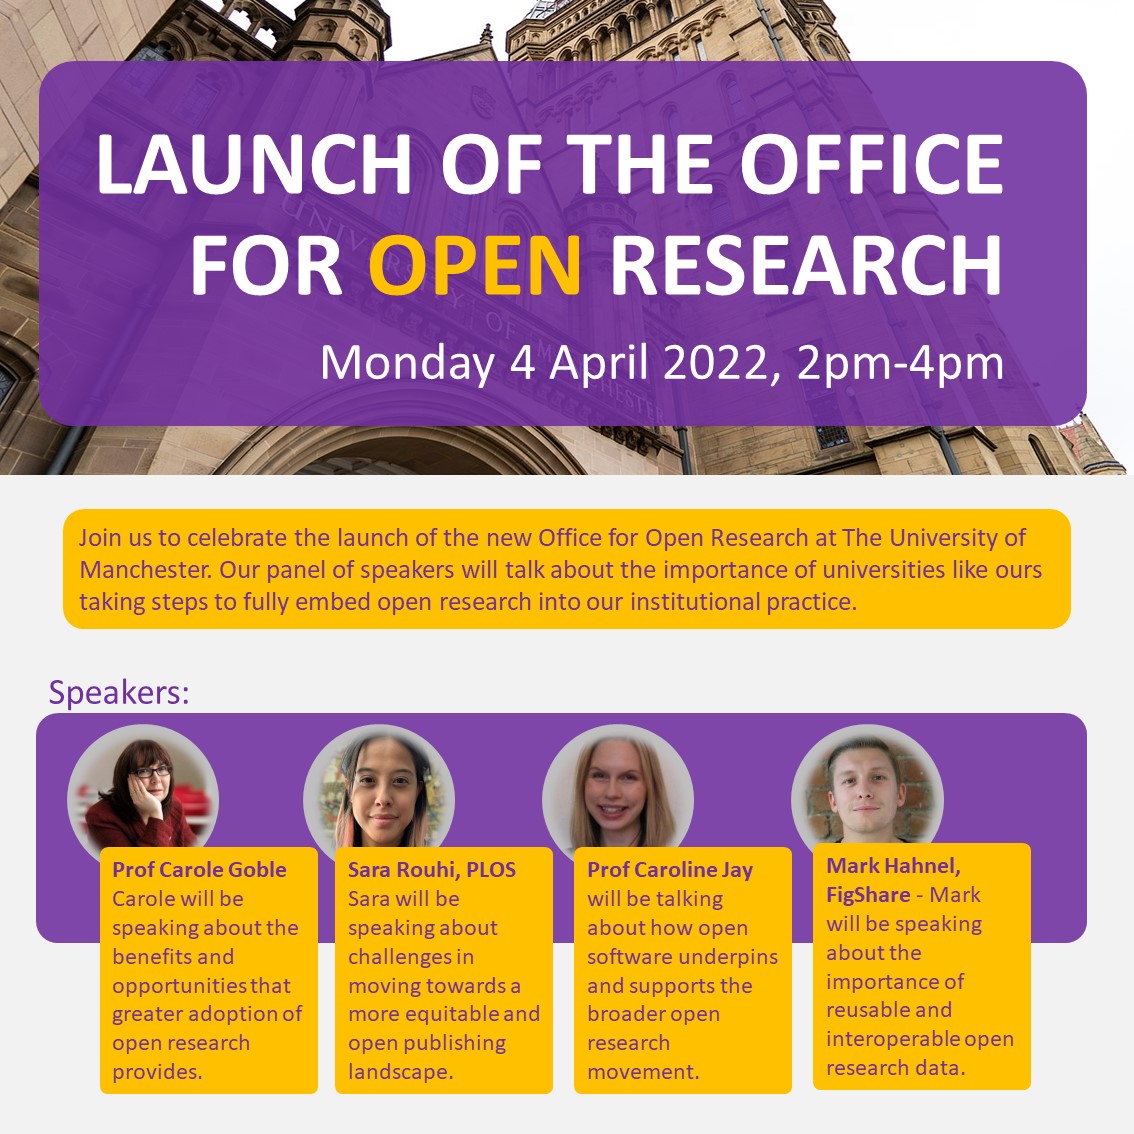 Our new Office for Open Research will be launching in 2 weeks, have you booked your space at our online Launch event? More info: ow.ly/206I50ImABv